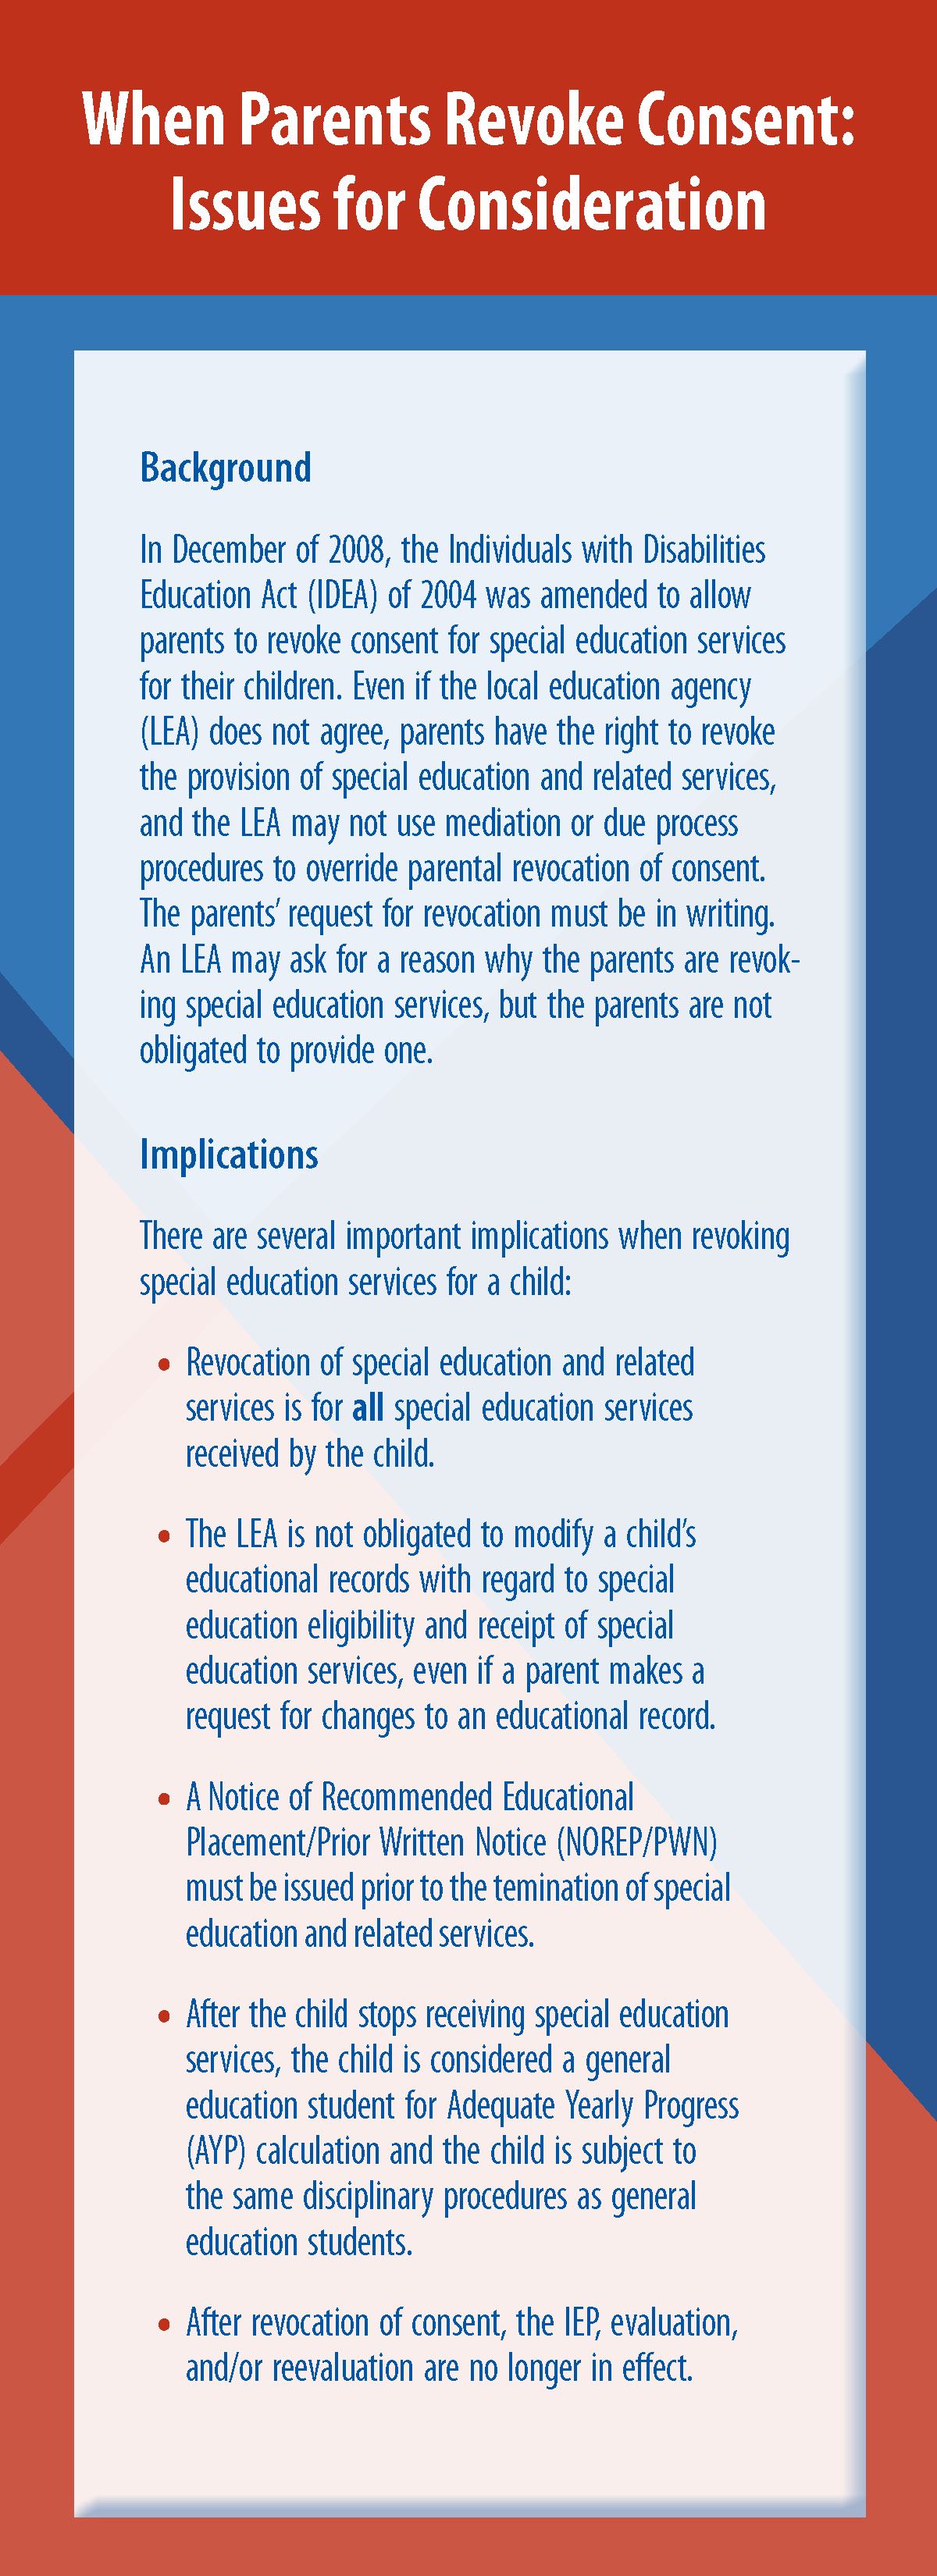 When Parents Revoke Consent: Issues for Consideration